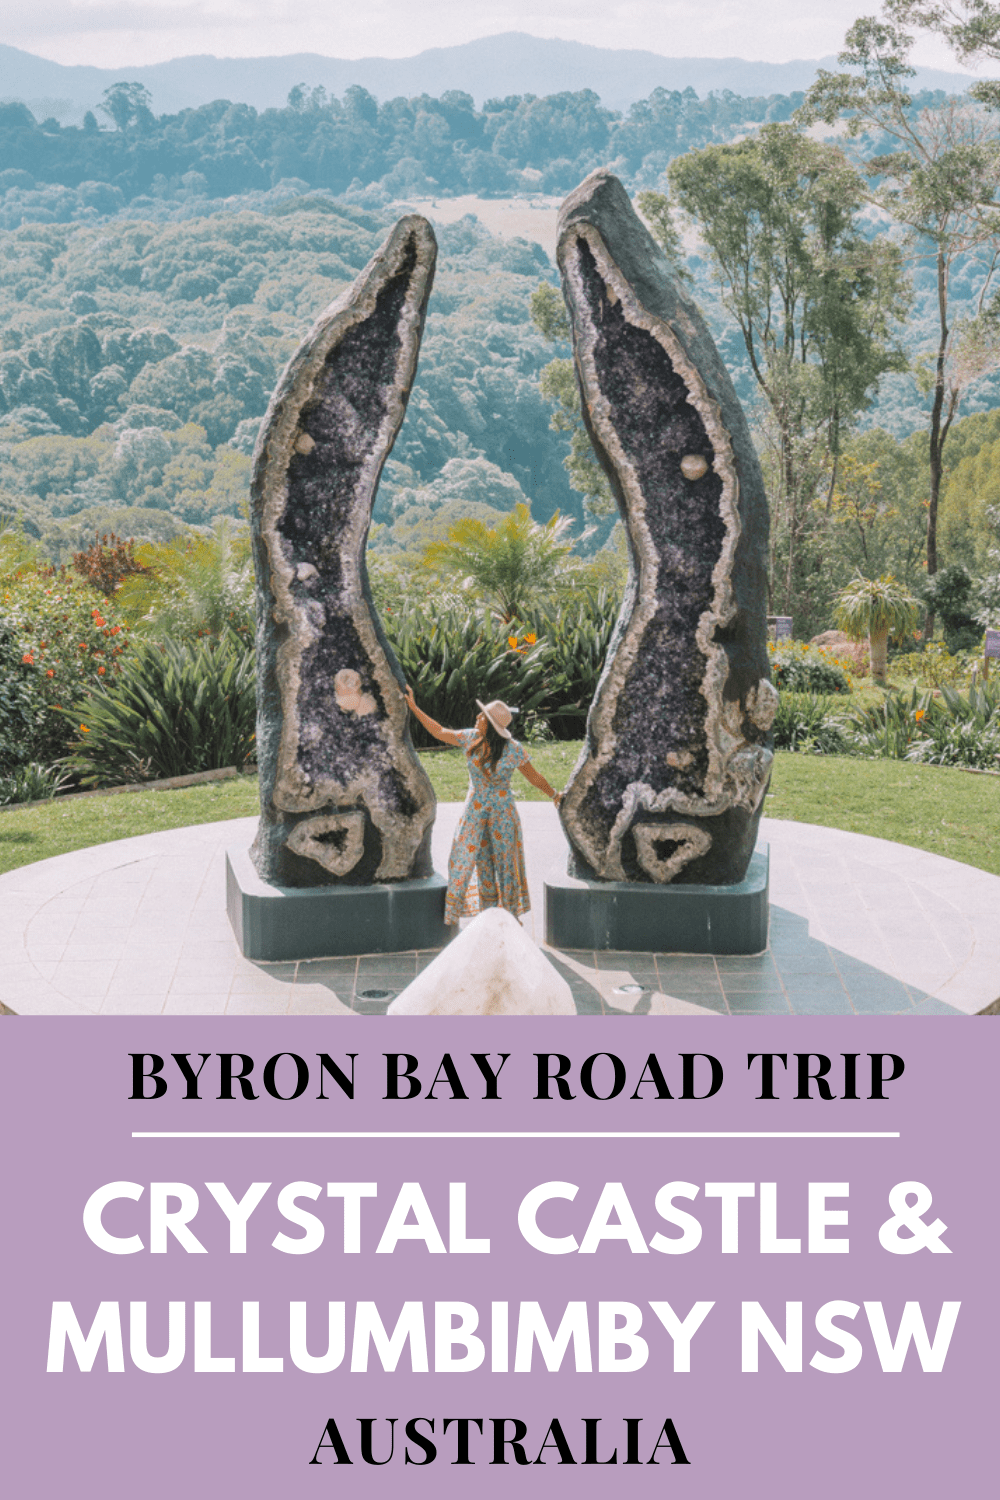 Visit Mullumbimby NSW & Crystal Castle: A 1-Day Byron Bay Road Trip